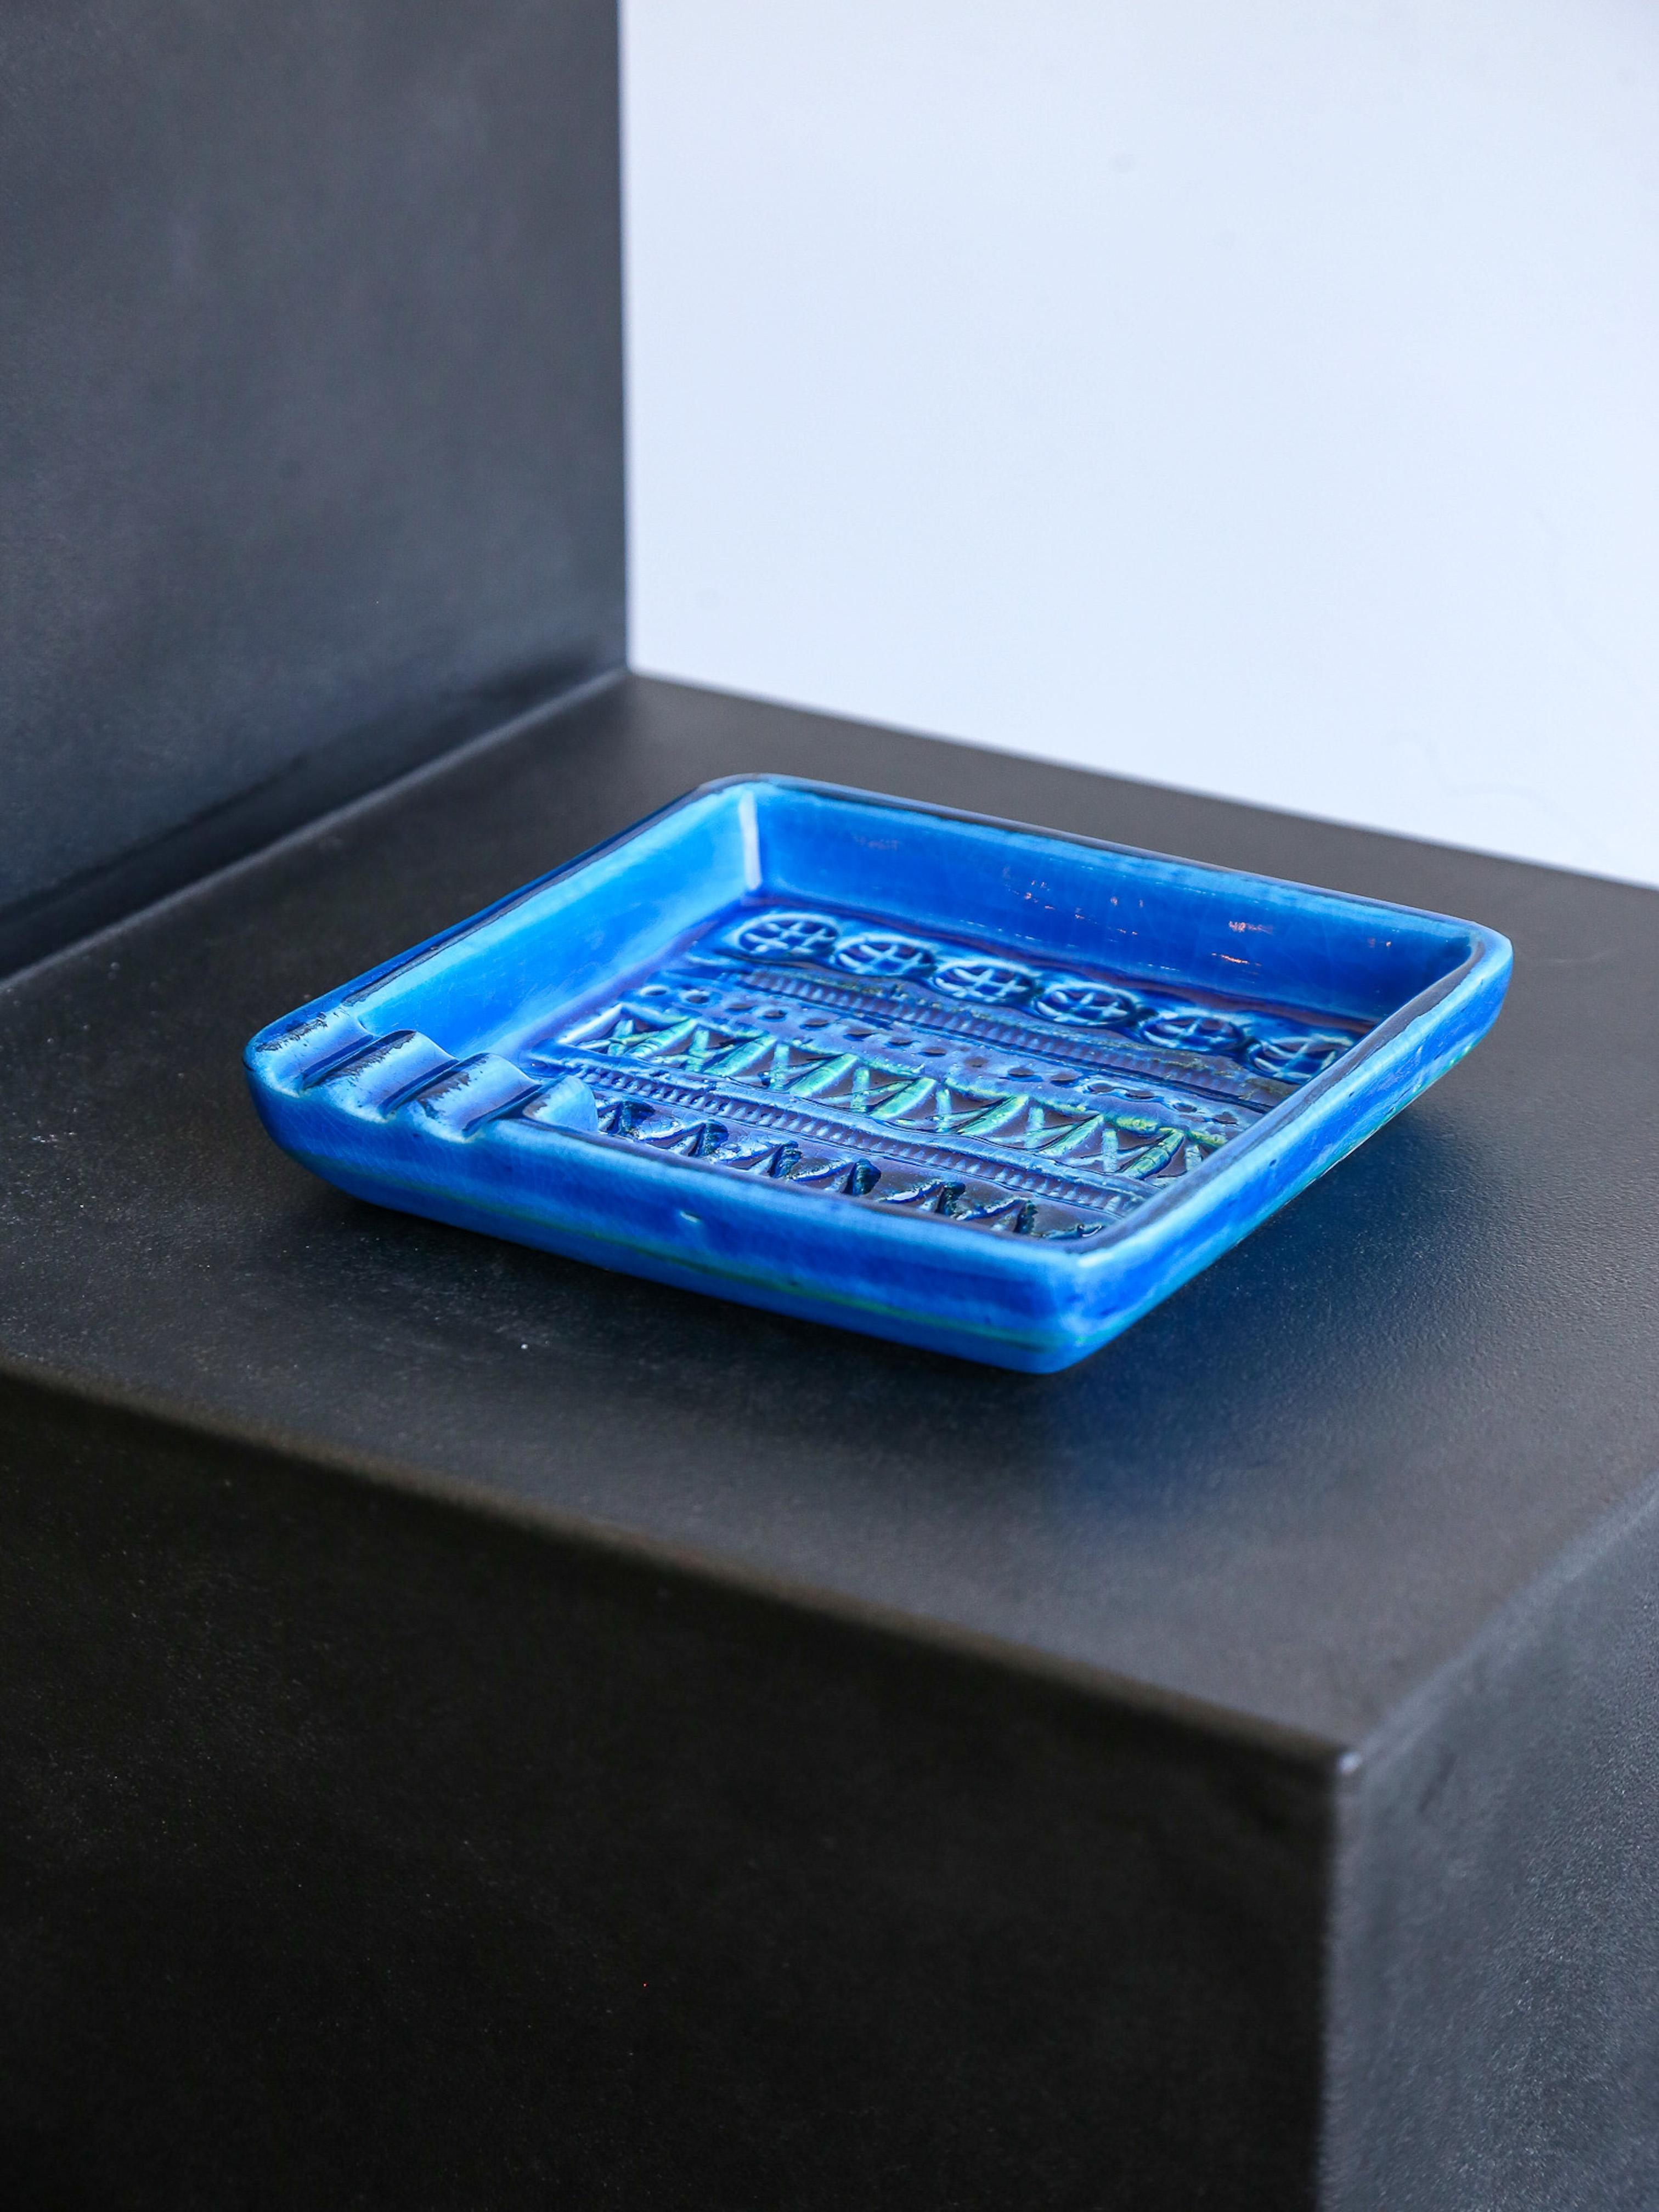 The Bitossi Rimini Blue ashtray is part of the Rimini Blue series produced by the Italian ceramics company Bitossi Ceramiche. This ashtray, like other pieces in the collection, features the distinctive Rimini Blue glaze that Bitossi is famous